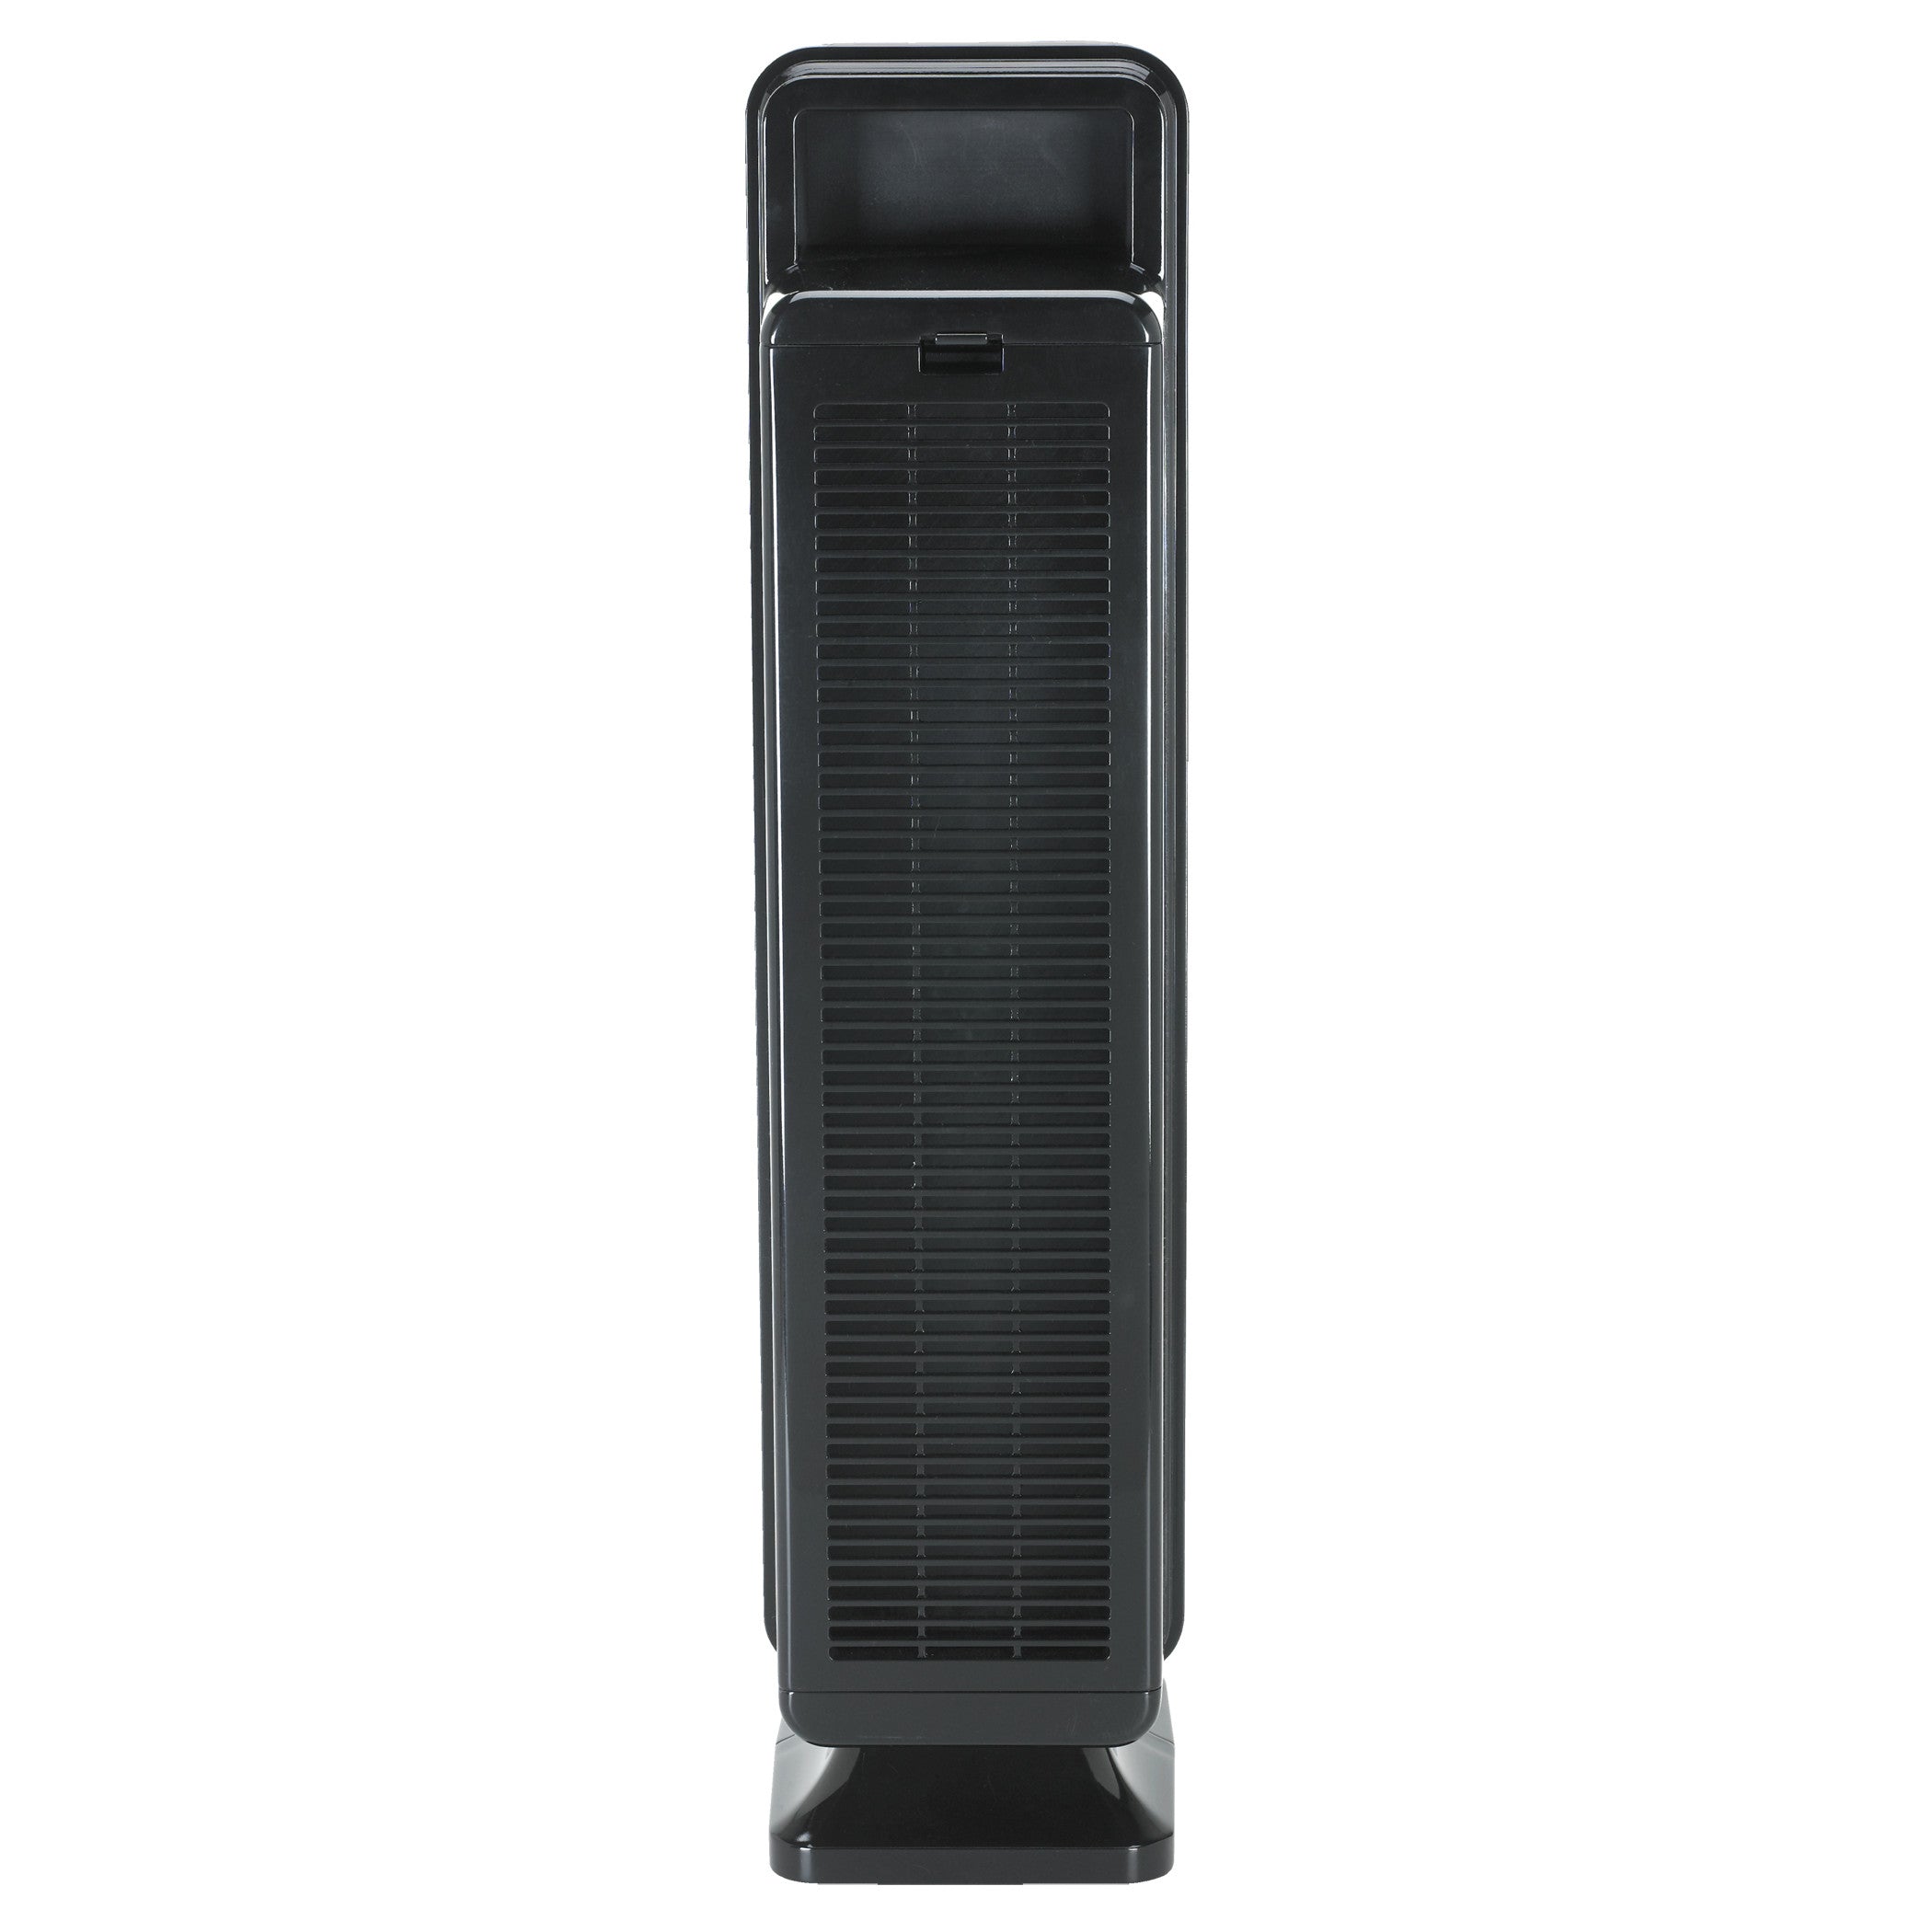 GermGuardian CDAP5500 WiFi Smart 4-in-1 Air Purifier with HEPA Filter, UV-C Sanitizer and Odor Reduction, 28-Inch Tower (black)